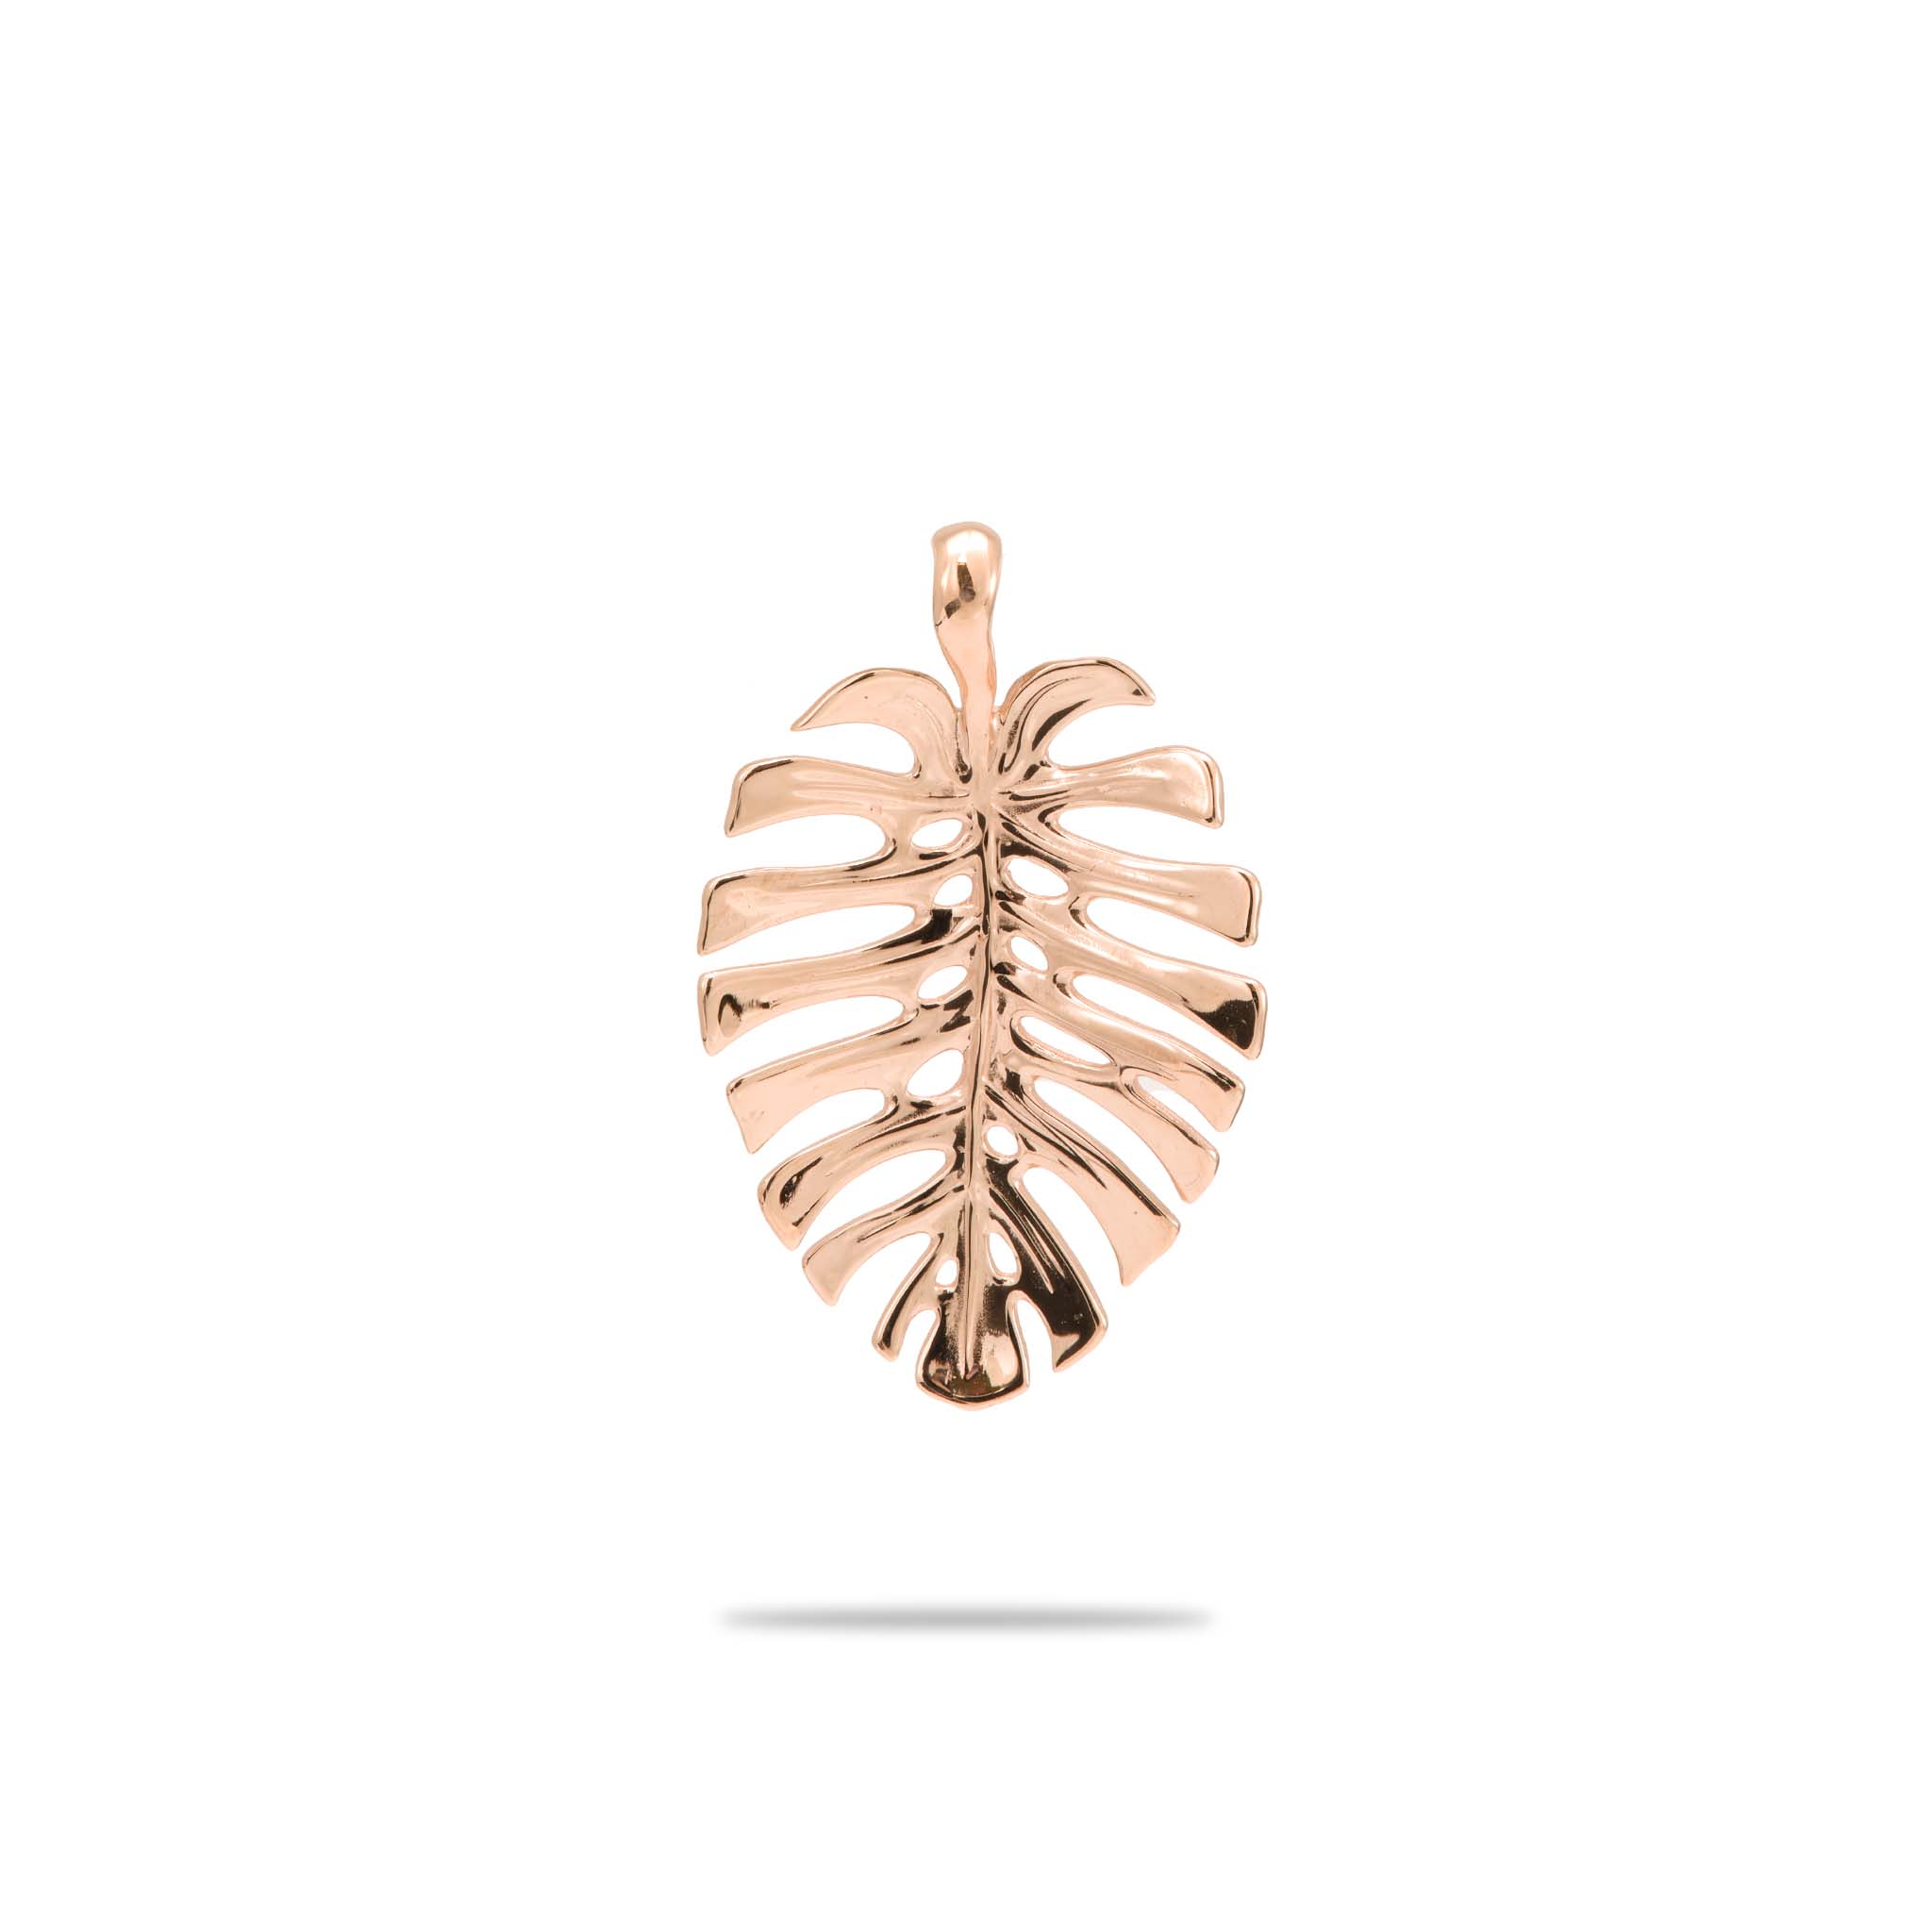 Monstera Pendant in Rose Gold - 20mm - Maui Divers Jewelry